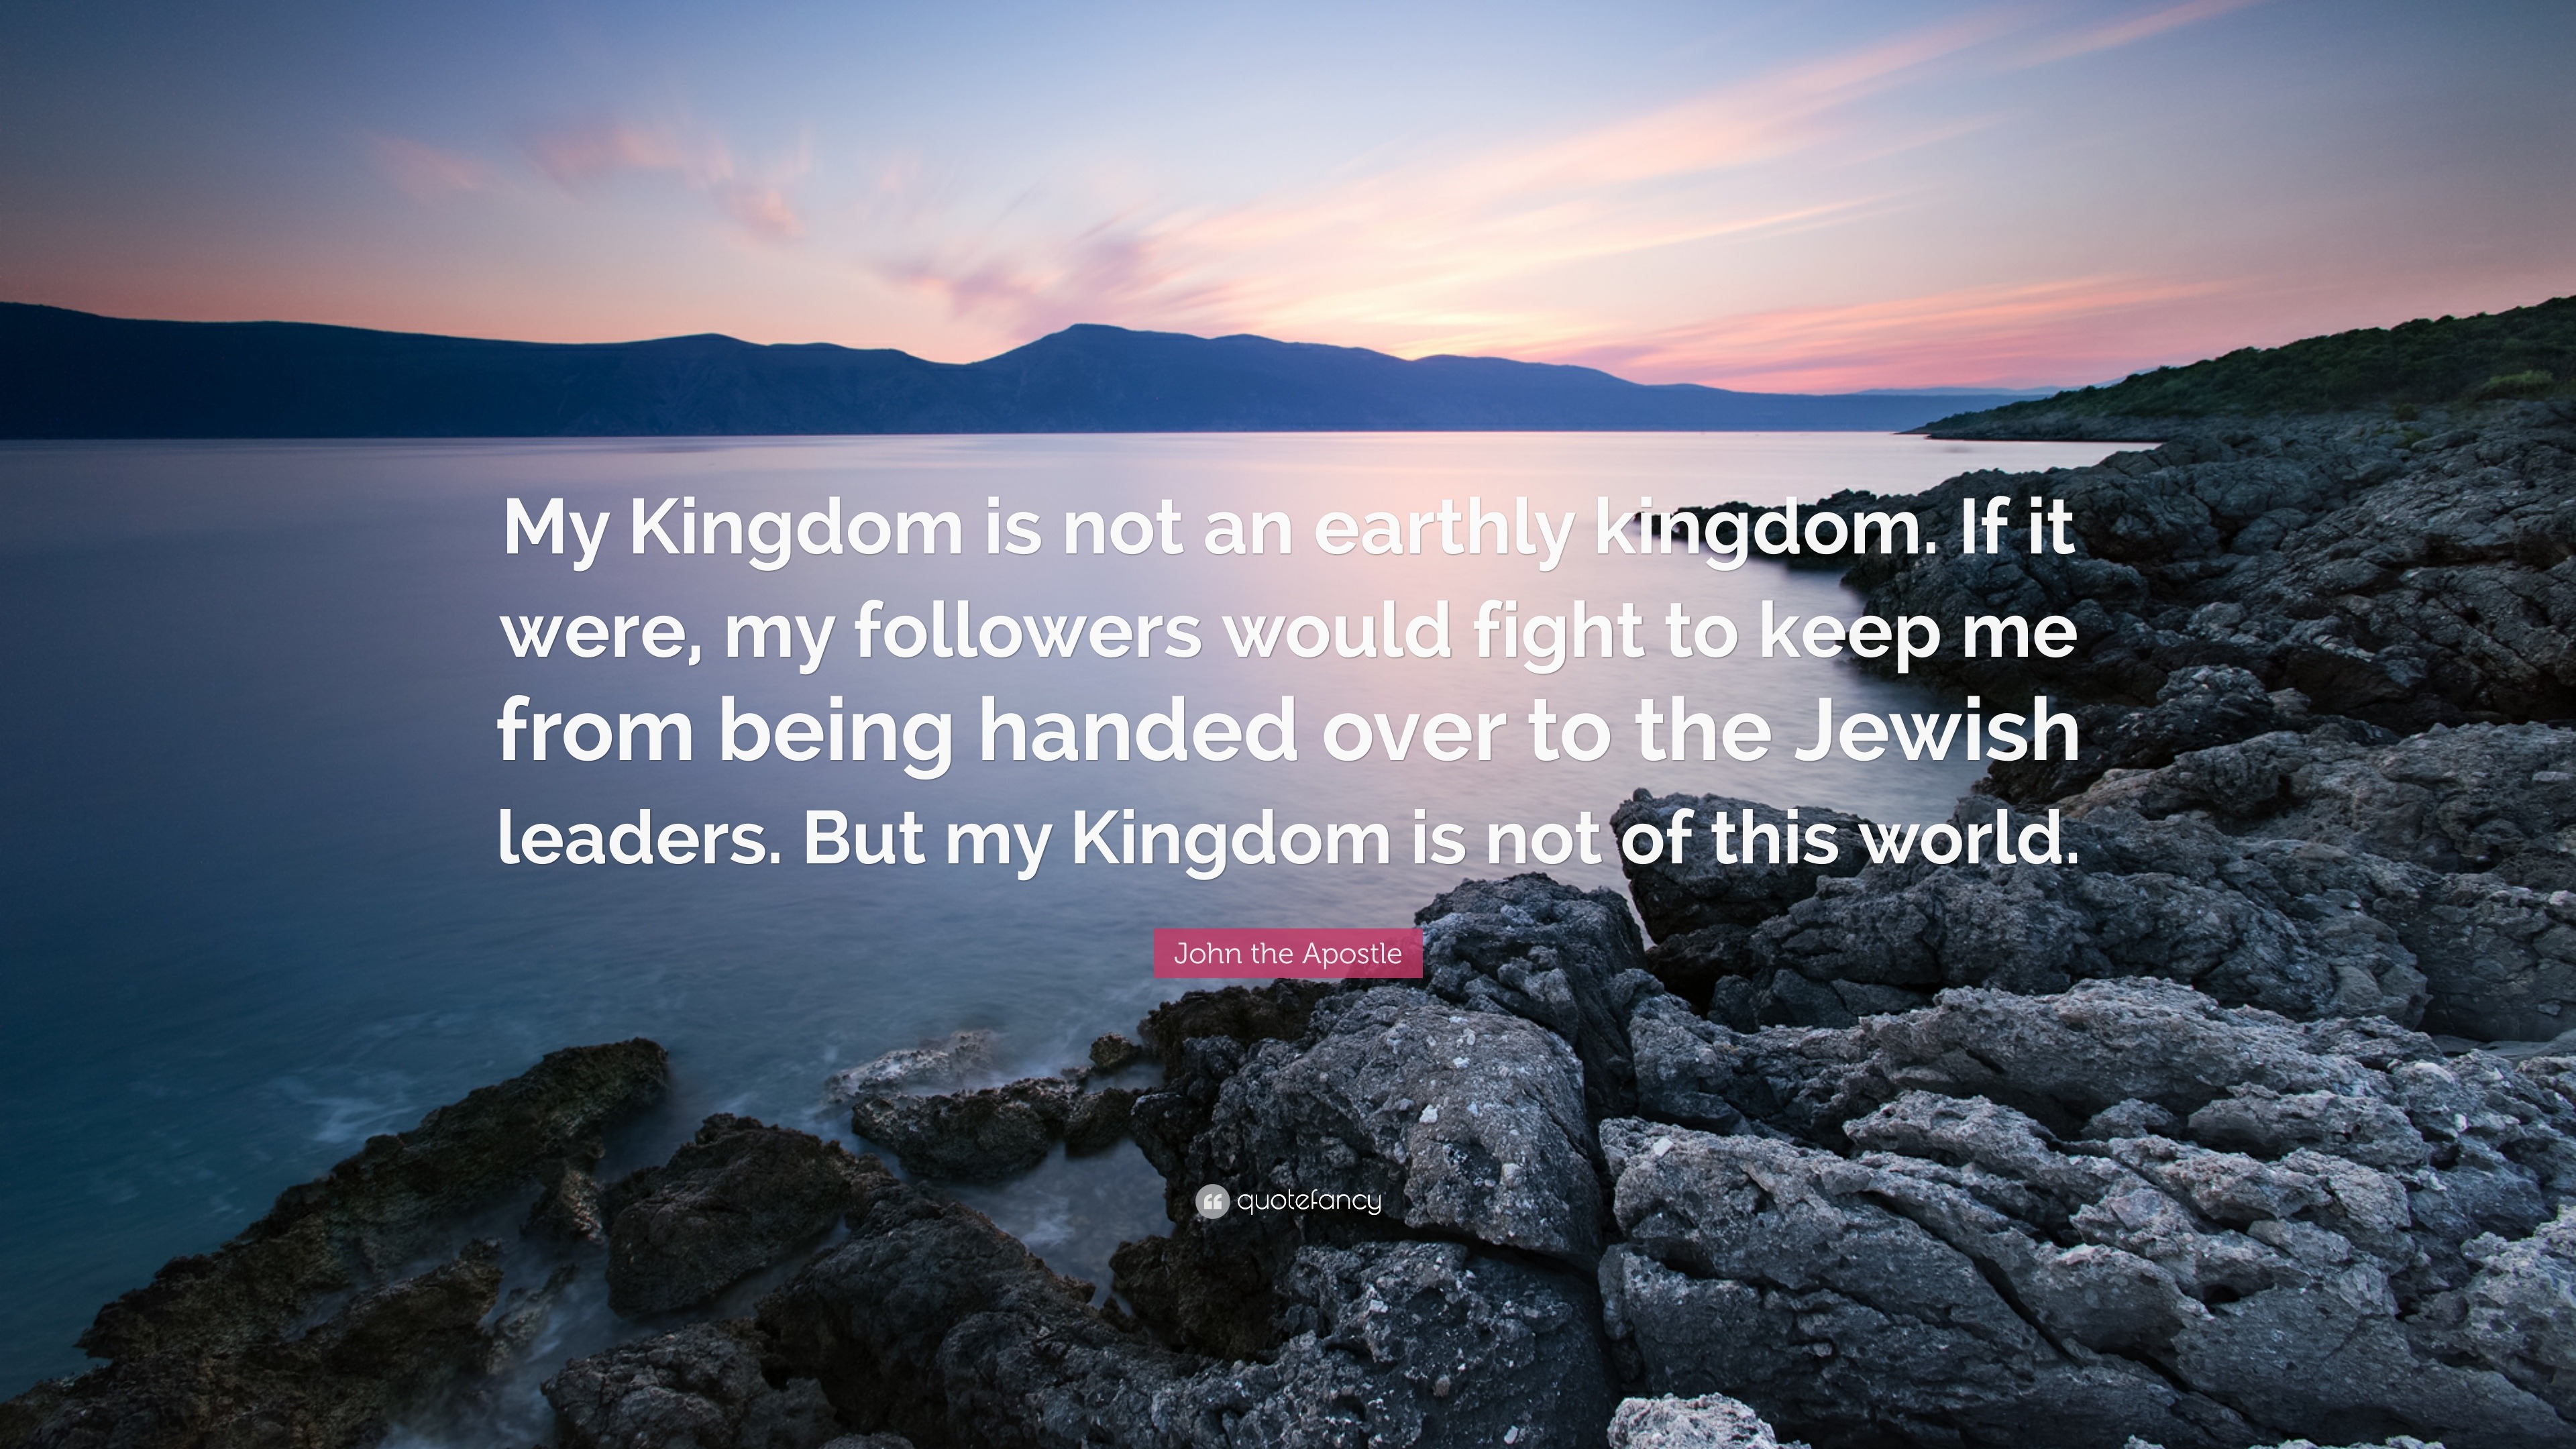 My kingdom is not of this world.